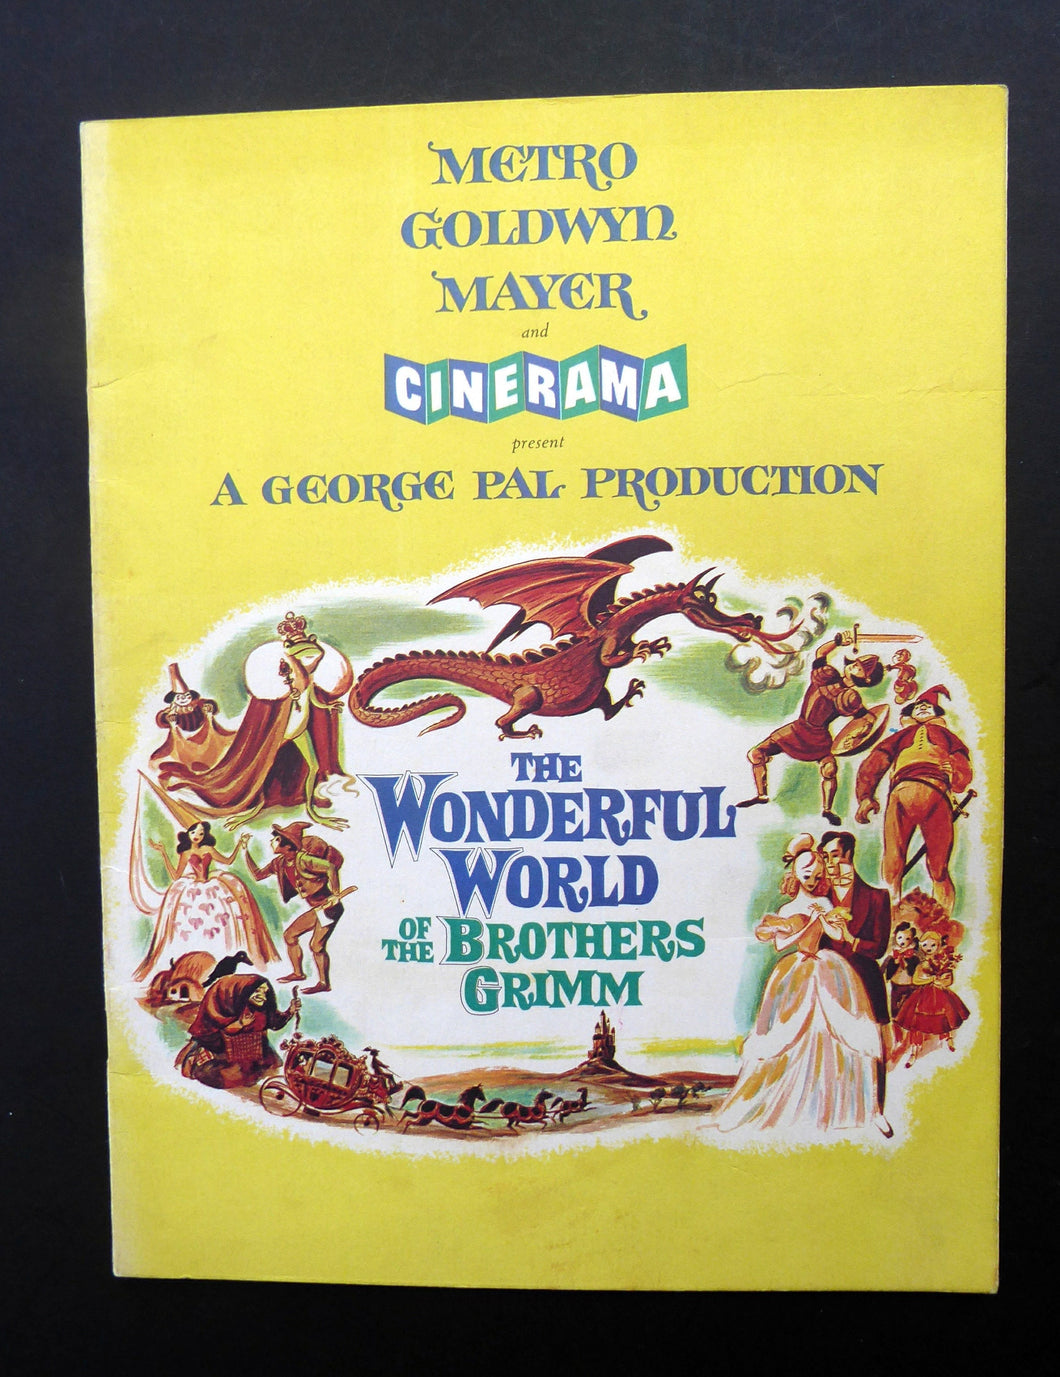 Collectable 1962 Wonderful World Of The Brothers Grimm. ORIGINAL MGM Film Programme